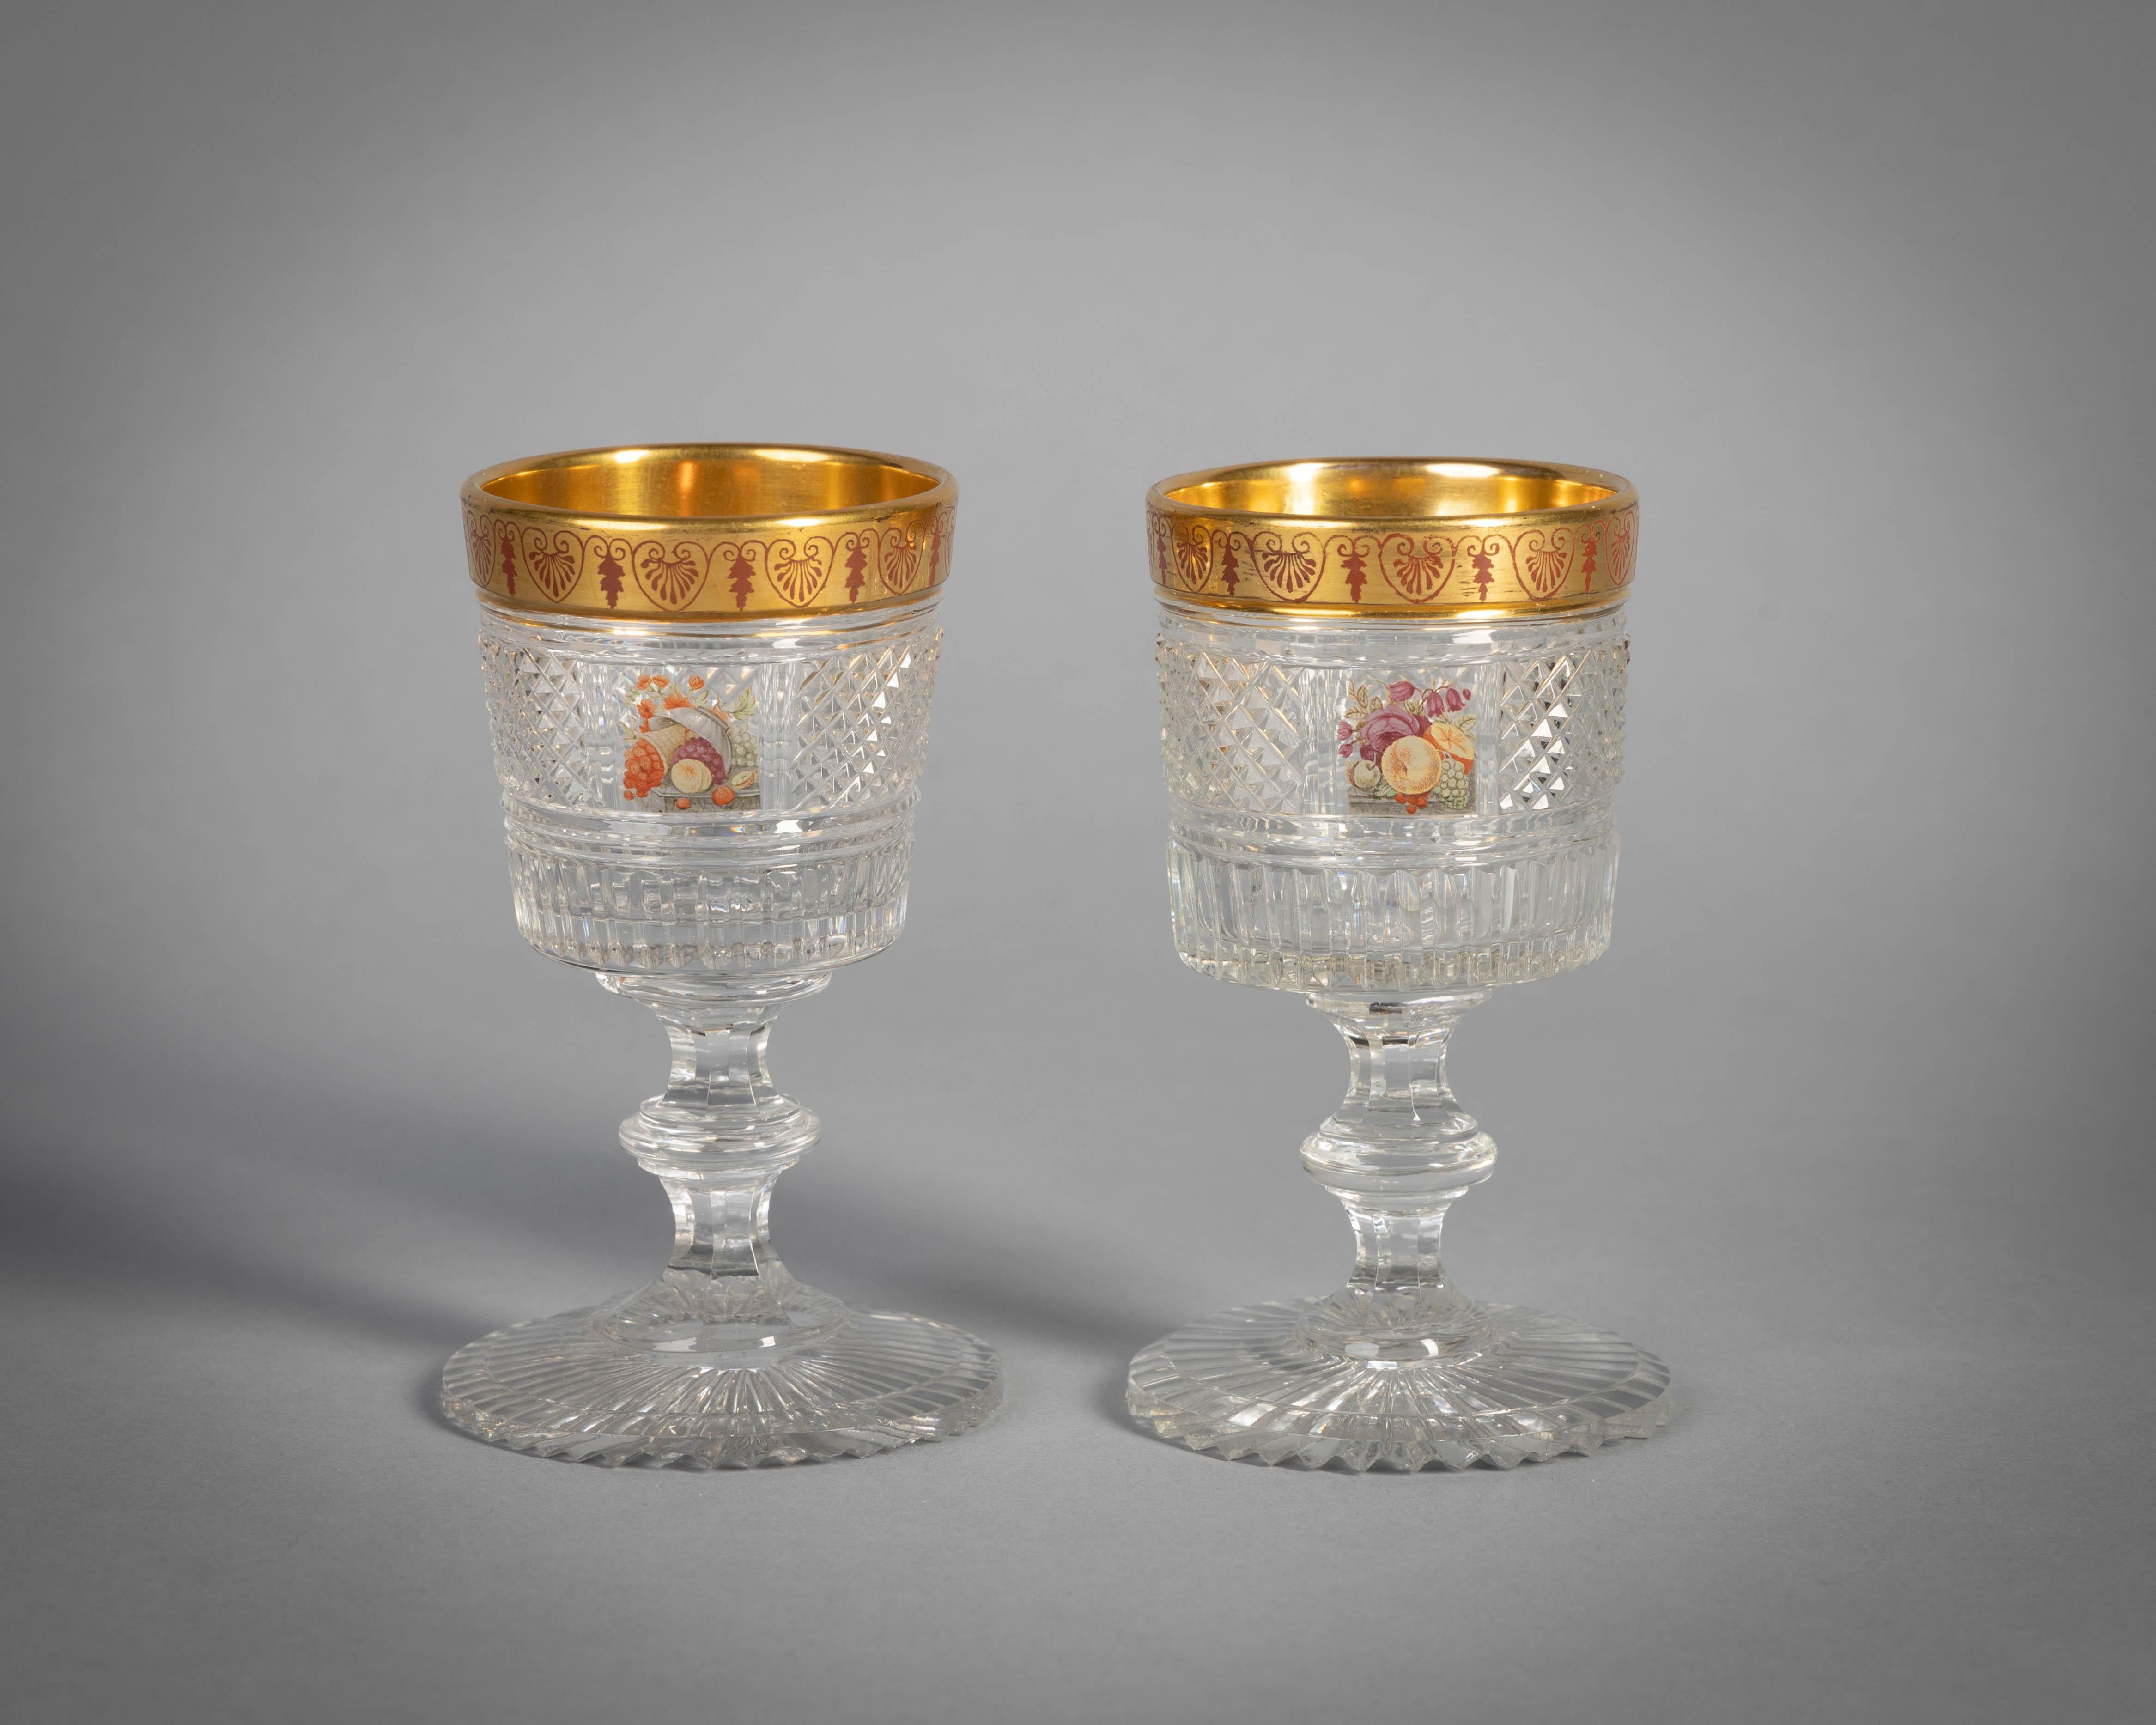 Extensive English Faceted and Enameled and Gilt Glass Service, circa 1815 For Sale 3